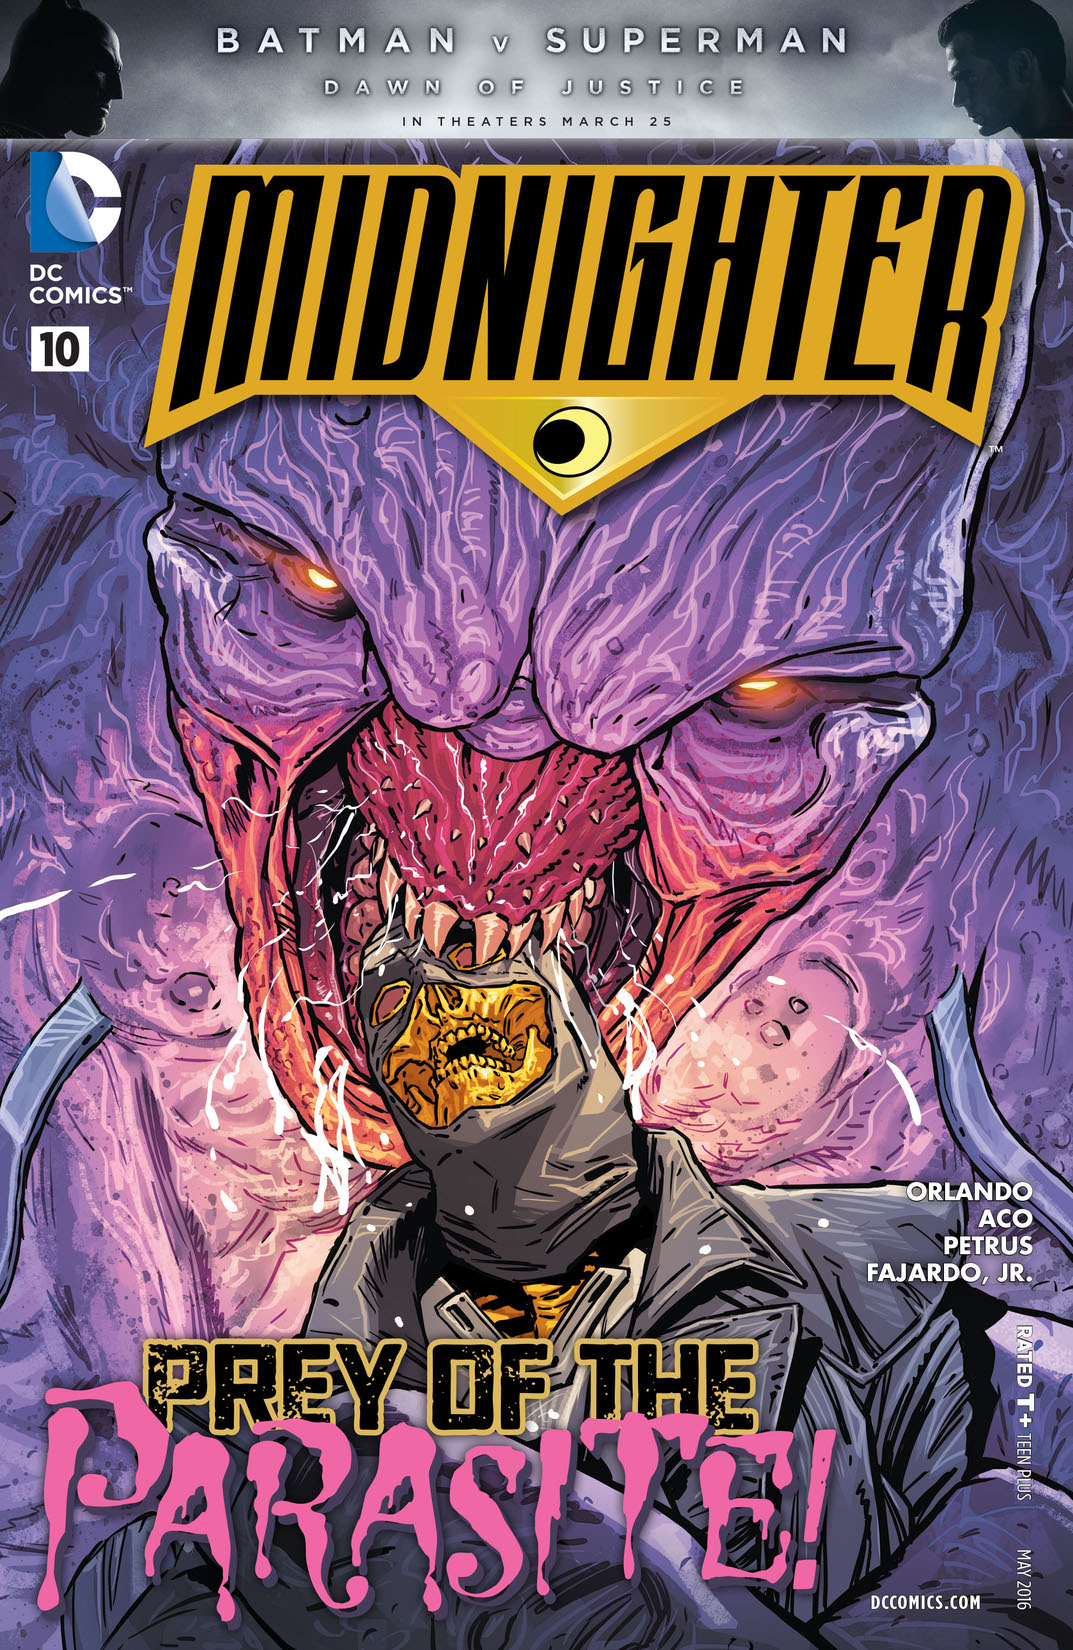 Midnighter (2015-) #10 preview images